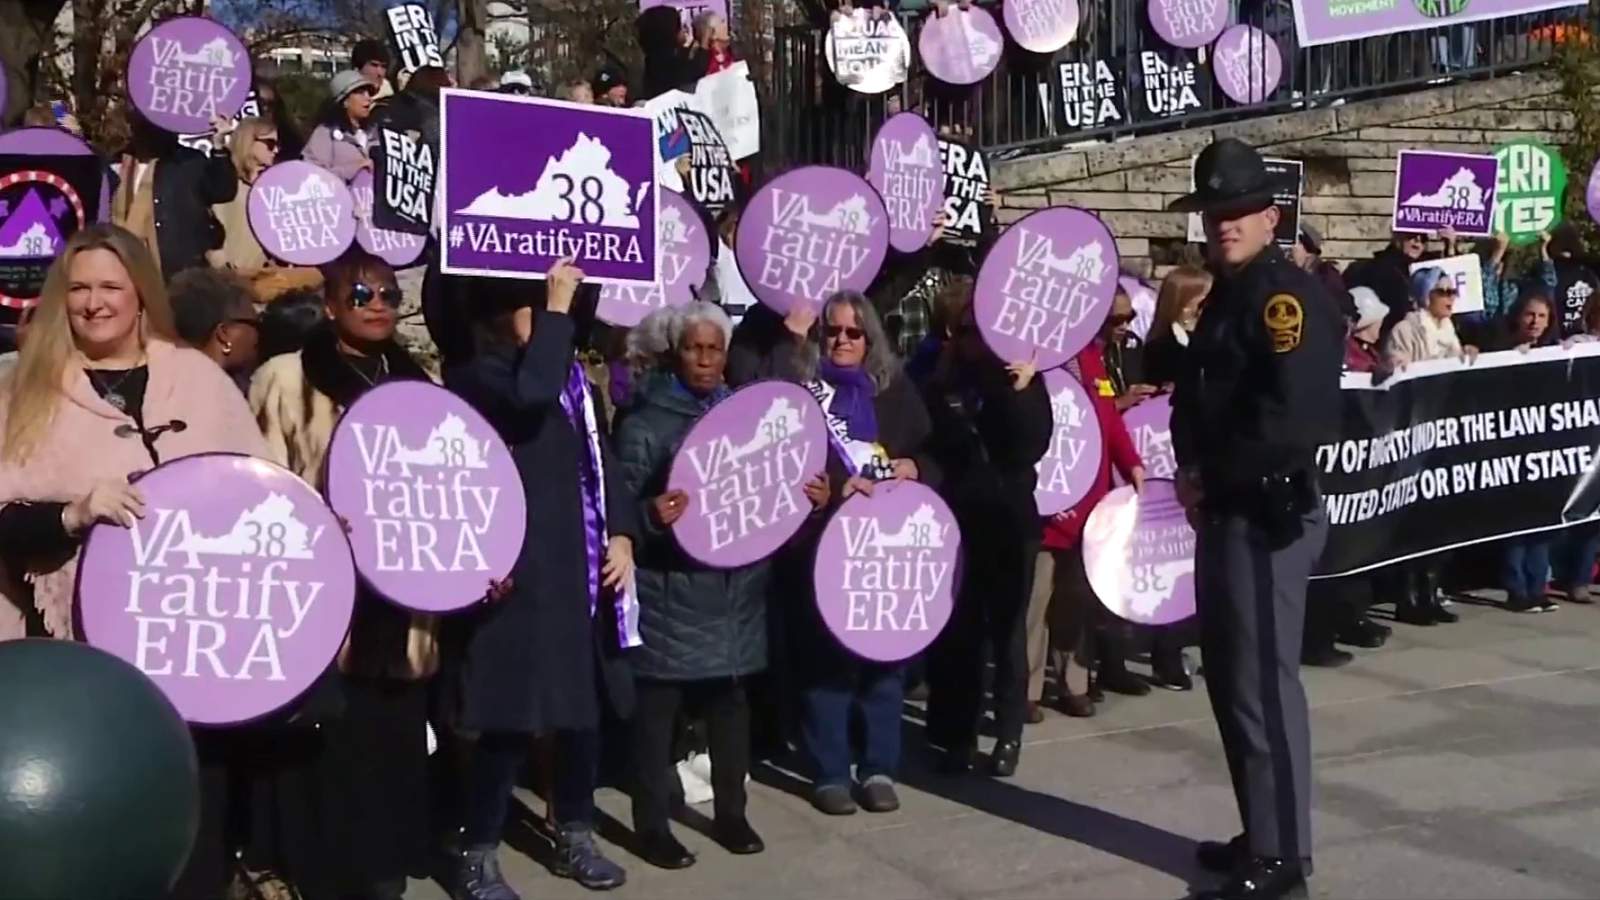 Virginians celebrate one year since Equal Rights Amendment ratified